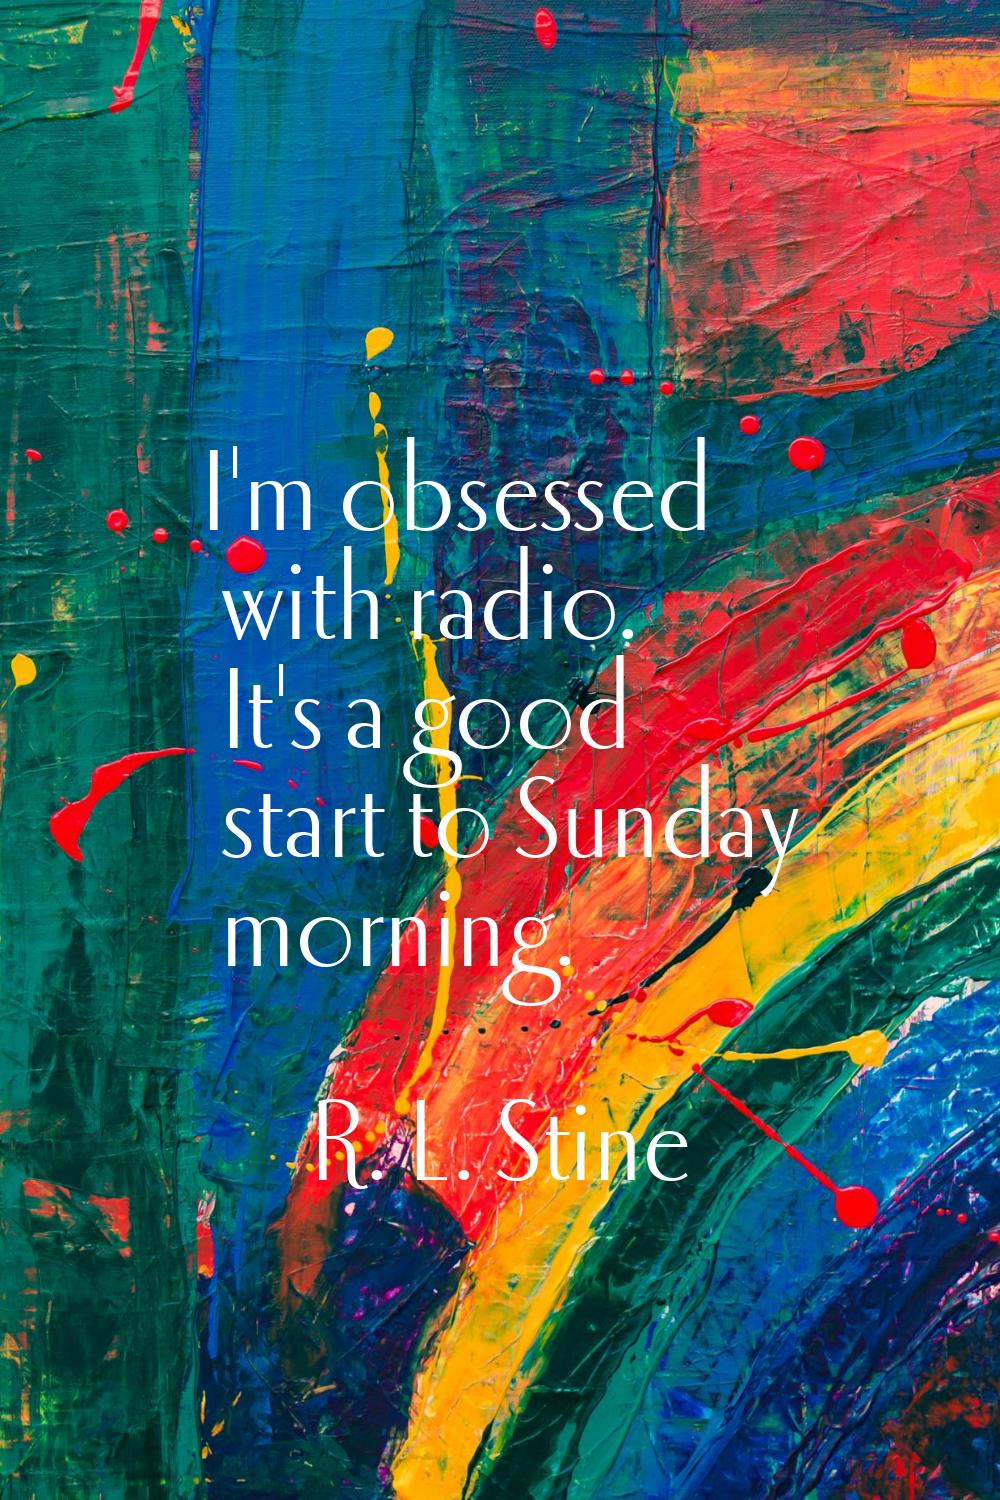 I'm obsessed with radio. It's a good start to Sunday morning.